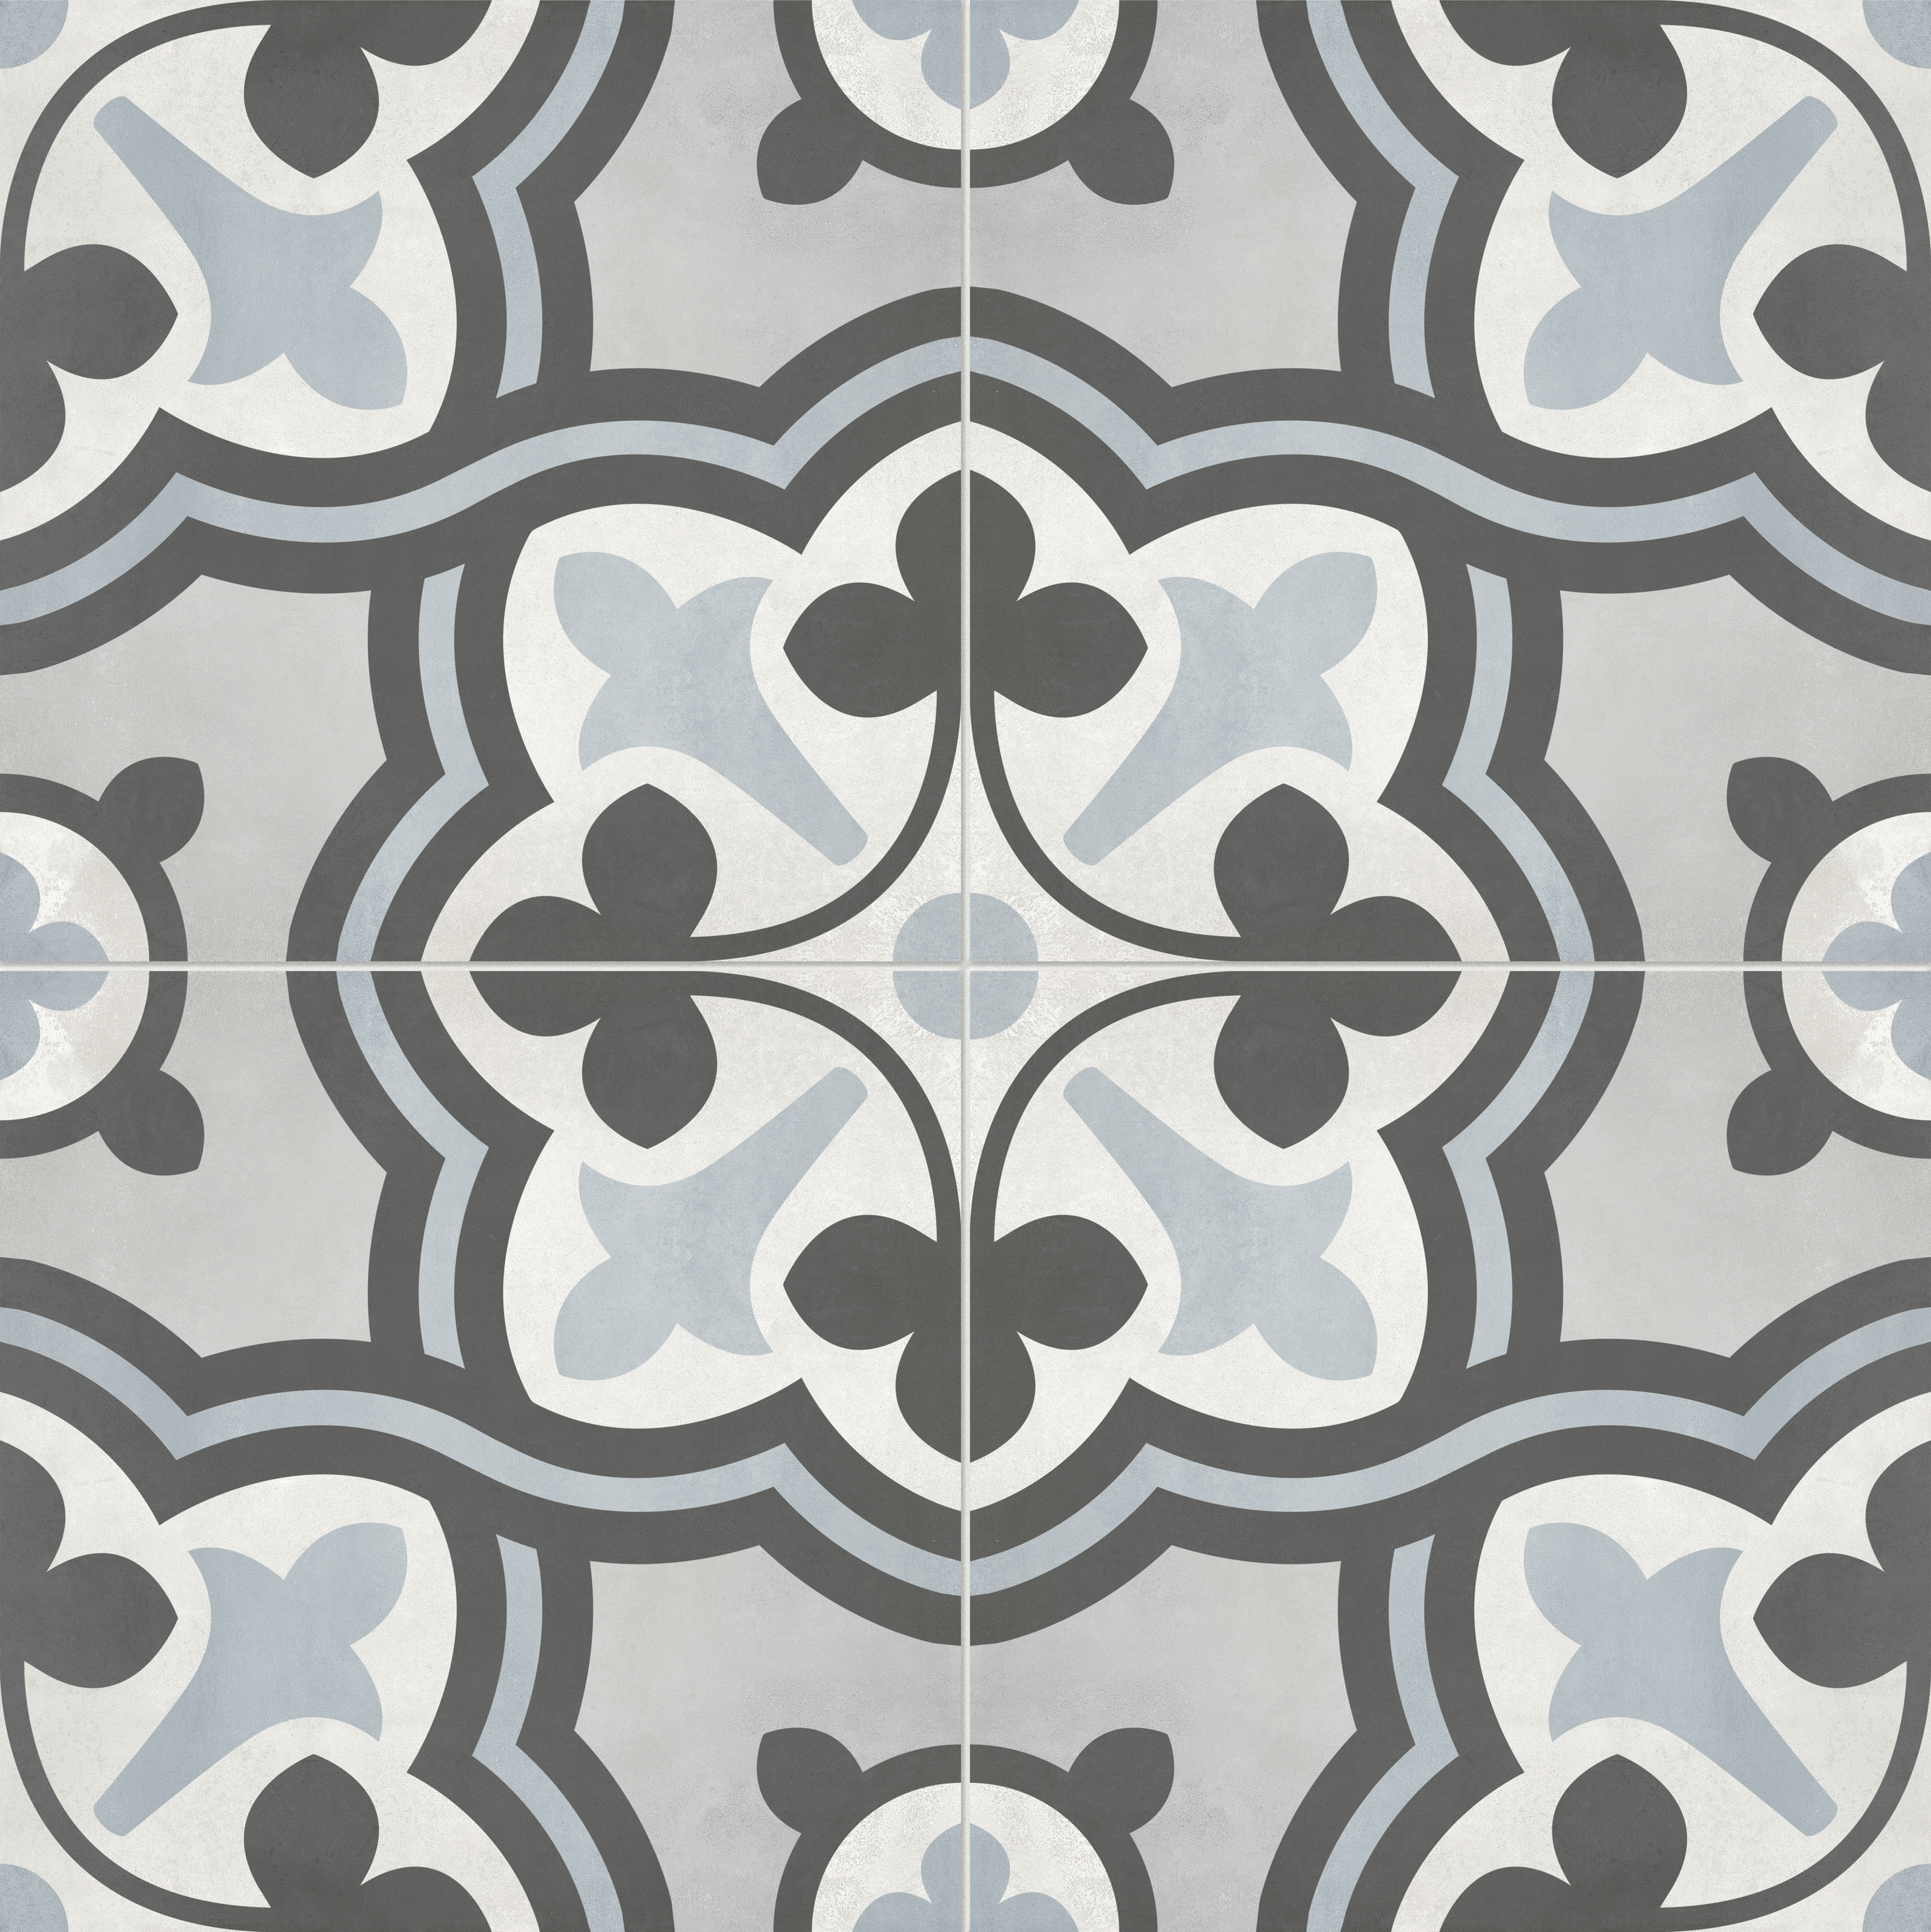 tide print pattern glazed porcelain deco tile print blend from form anatolia collection distributed by surface group international matte finish pressed edge 8x8 square shape